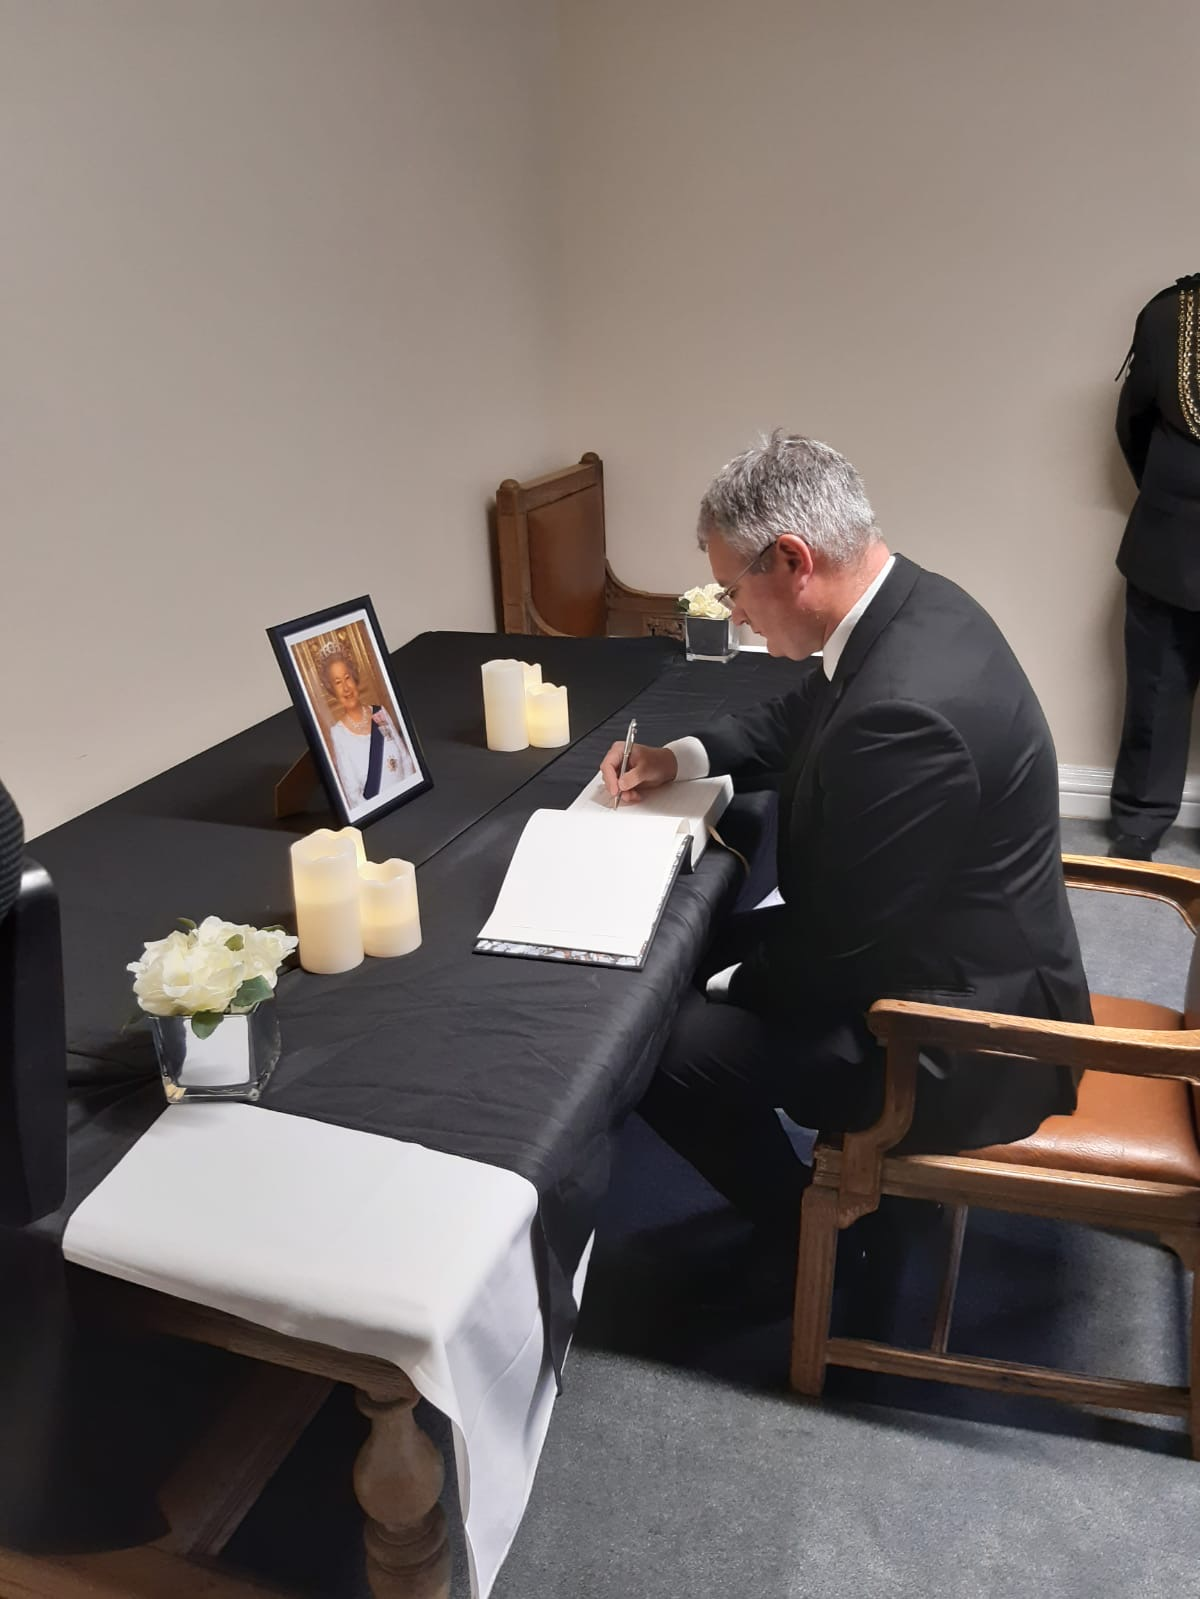 Book of condolence: Councillor James Lewis, leader of Leeds City Council signs the book of condolence for Her Majesty The Queen at Leeds Civic Hall. For a copy of this image in colour, please download it directly or contact the media team.